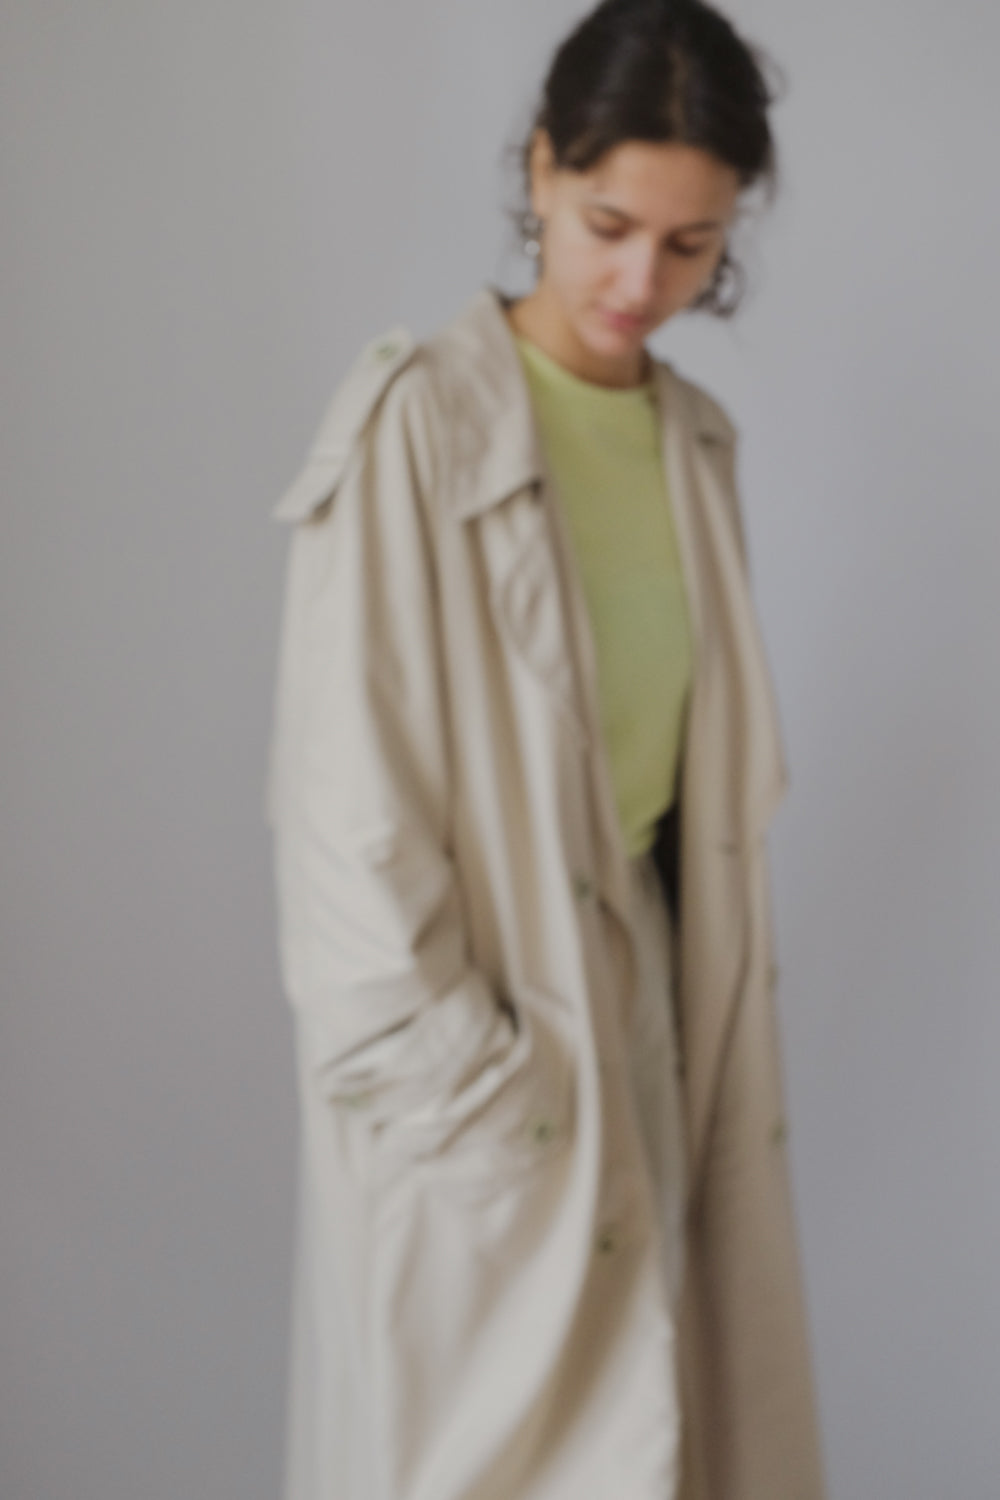 CLASSY BEIGE MAXI VINTAGE SUMMER TRENCH